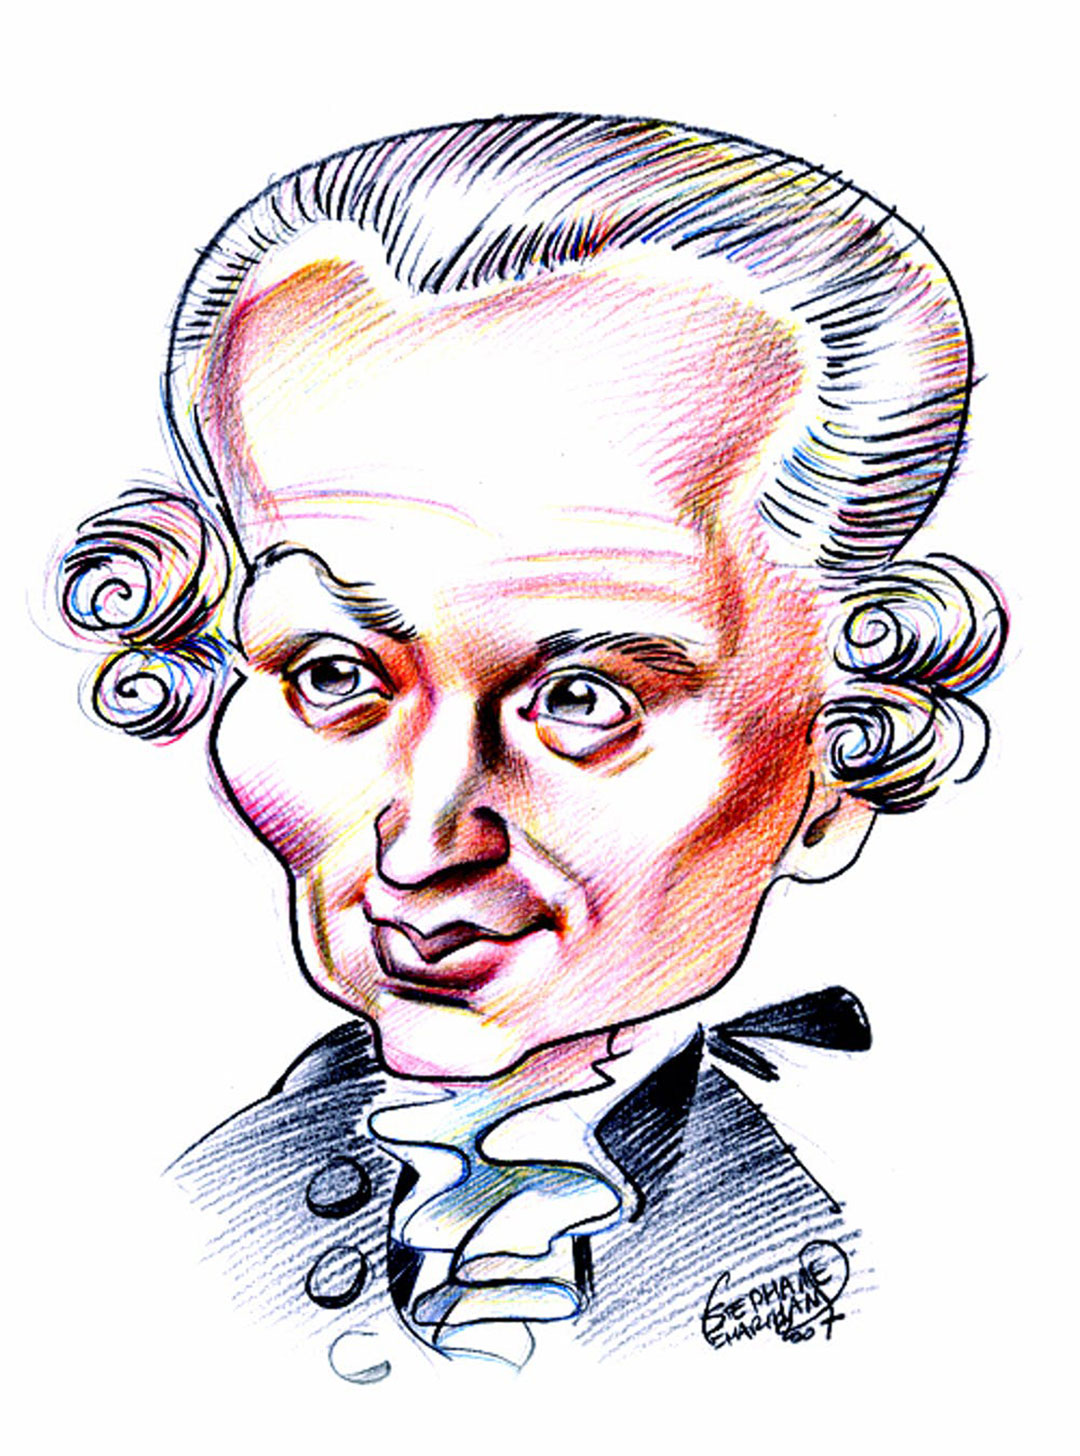 Caricatura de Immanuel Kant. Stéphane Lemarchand Caricaturiste (Wikimedia Commons, CC BY-SA)